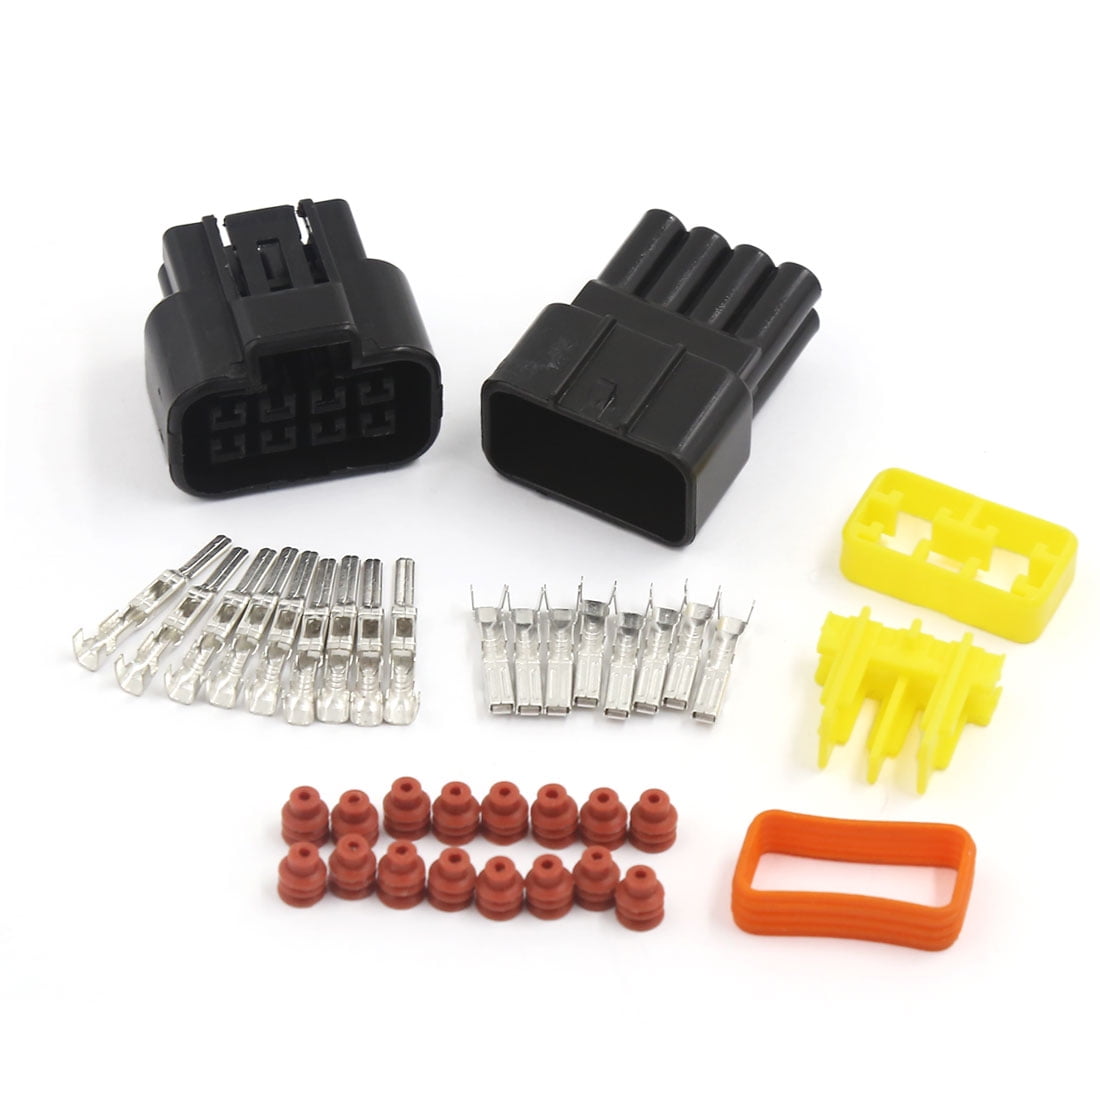 Details about   1/2/3/6 Pin Way Waterproof Seal Electrical Wire Auto Connector Plug Kits X10 F5